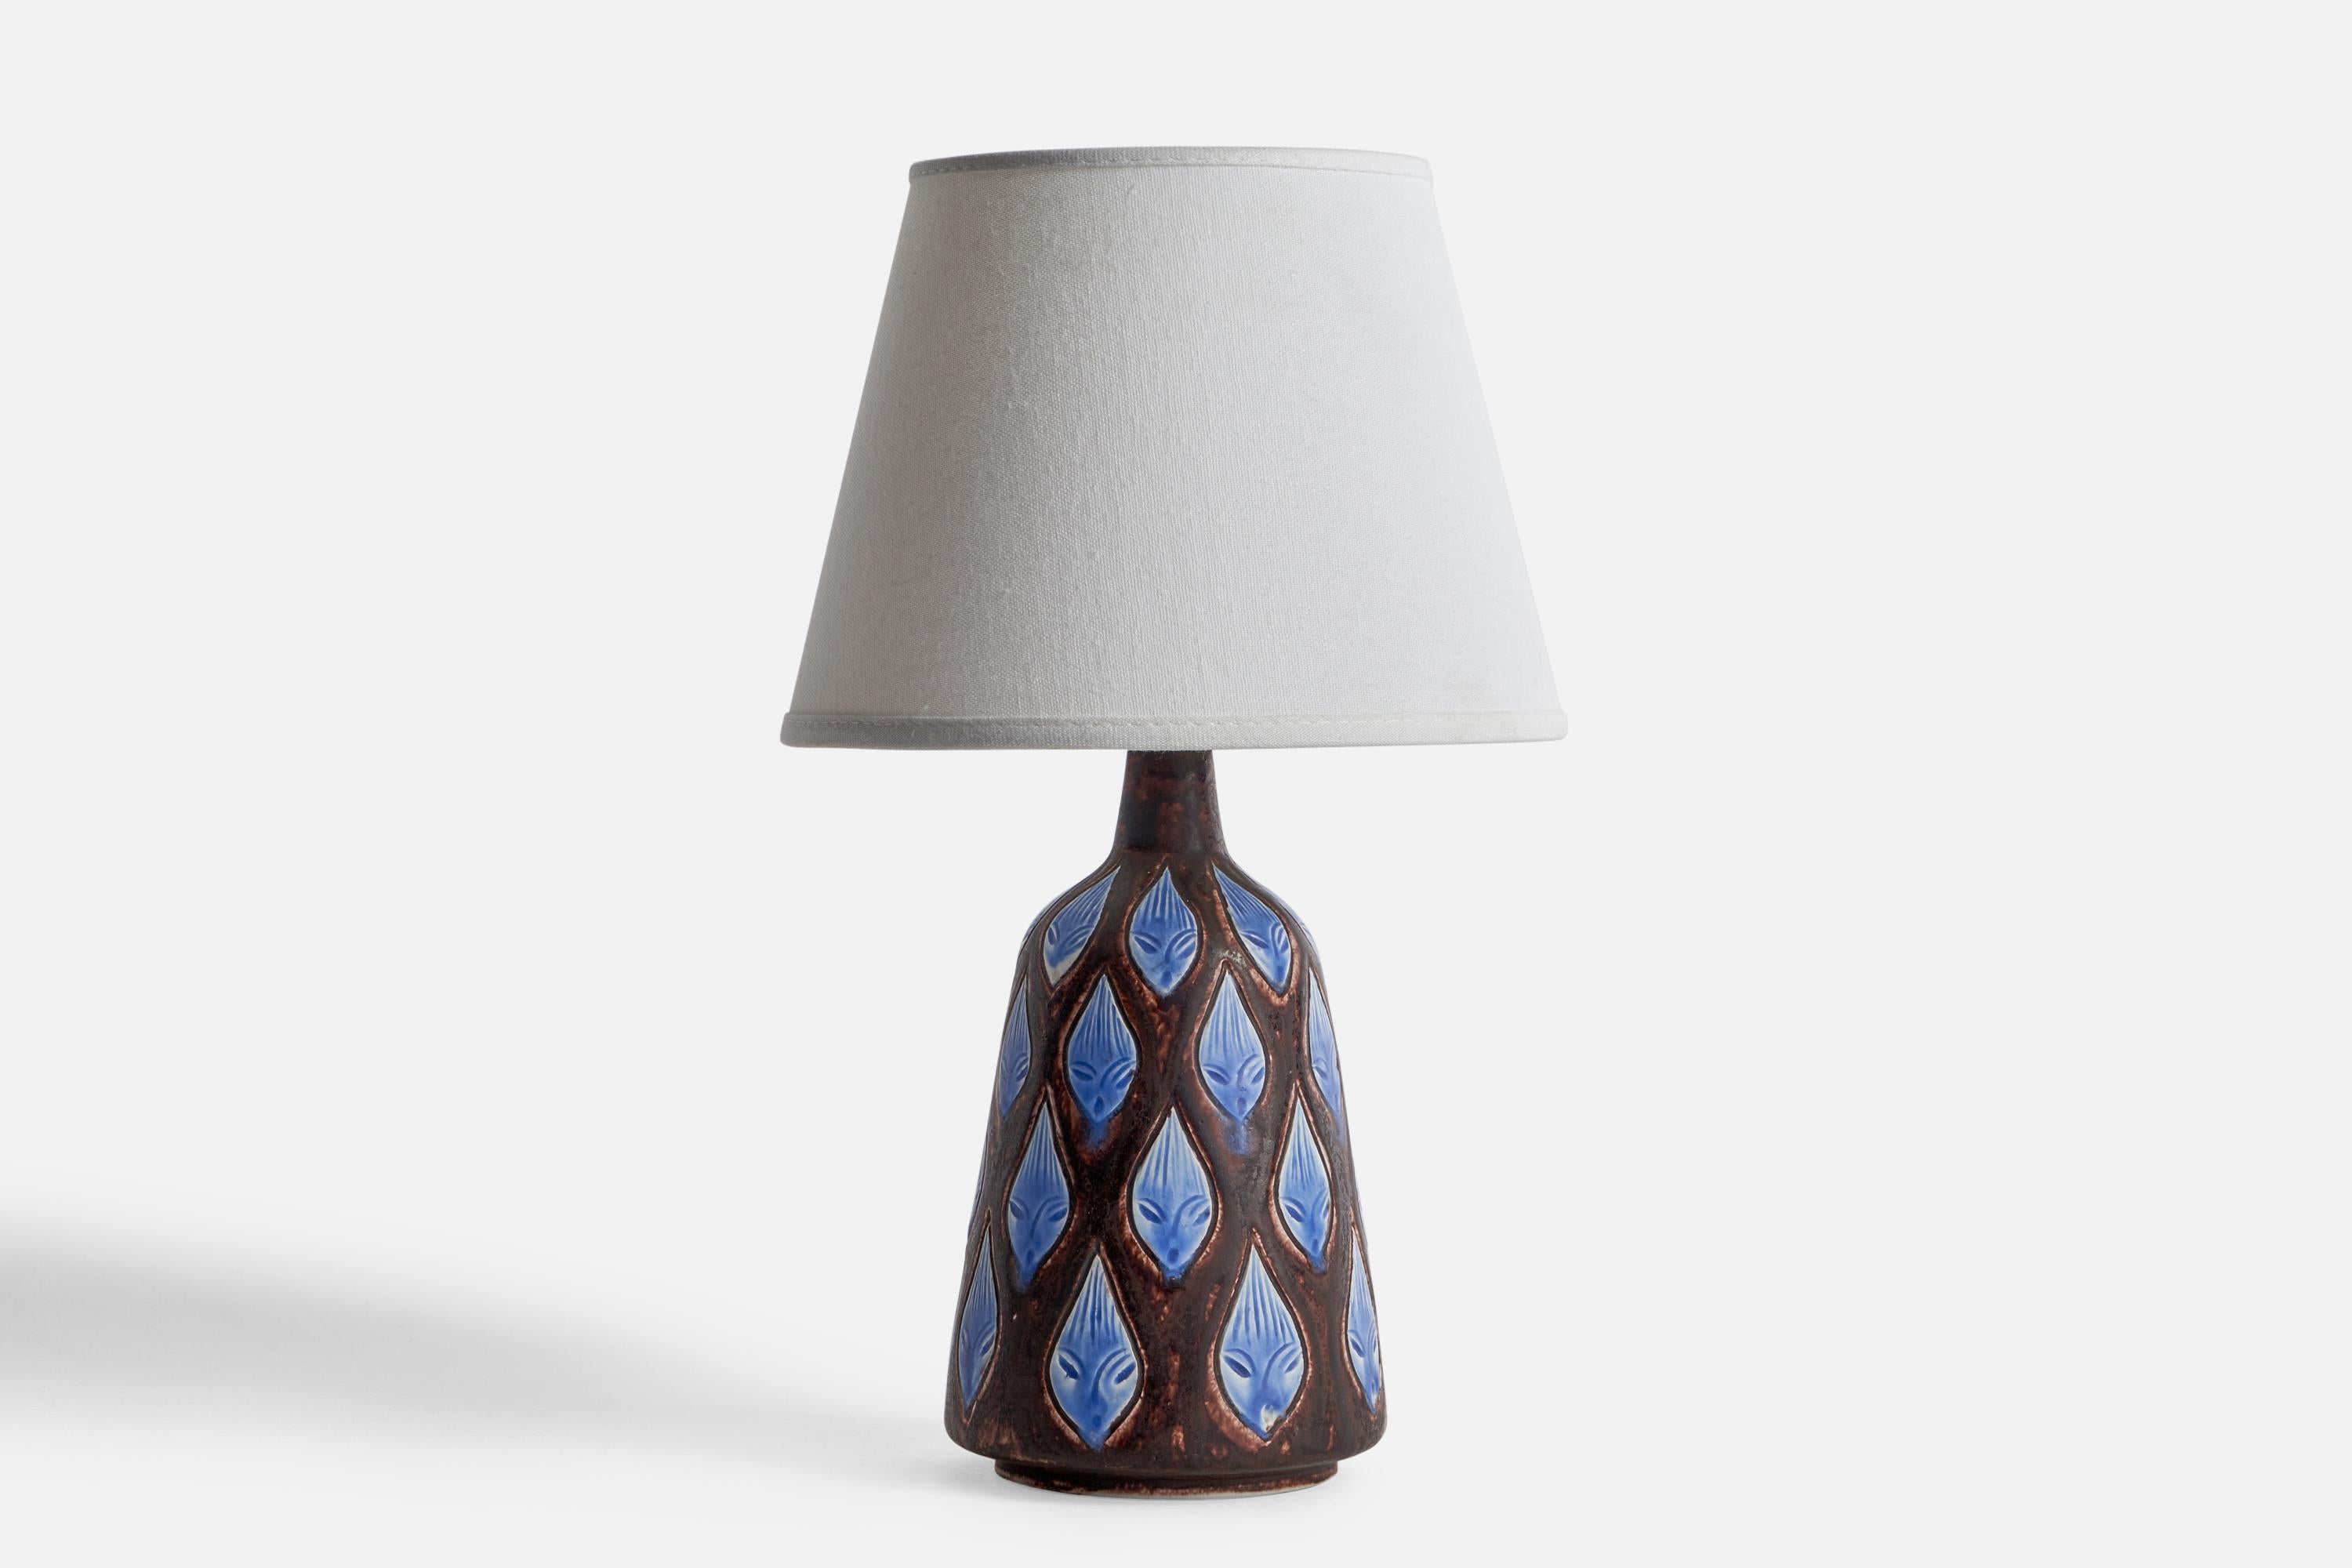 A brown and blue-glazed and incised table lamp designed by Hertha Bengtson and produced by Rörstrand, Sweden, 1960s.

Dimensions of Lamp (inches): 10.5” H x 4.53” Diameter
Dimensions of Shade (inches): 4.5” Top Diameter x 10” Bottom Diameter x 5.25”